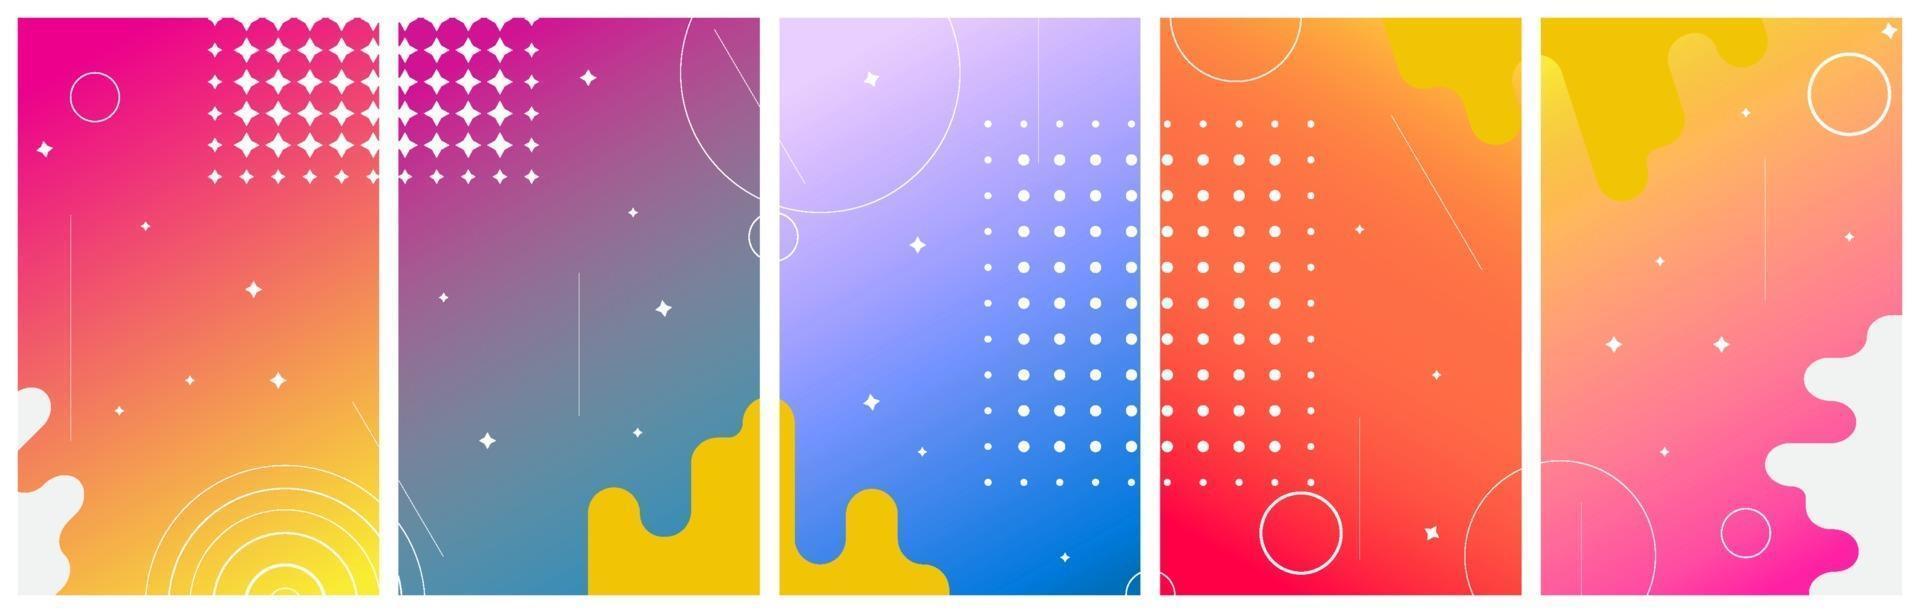 Set of Colorful abstract background with circles for stories, social networks. Vector Illustration